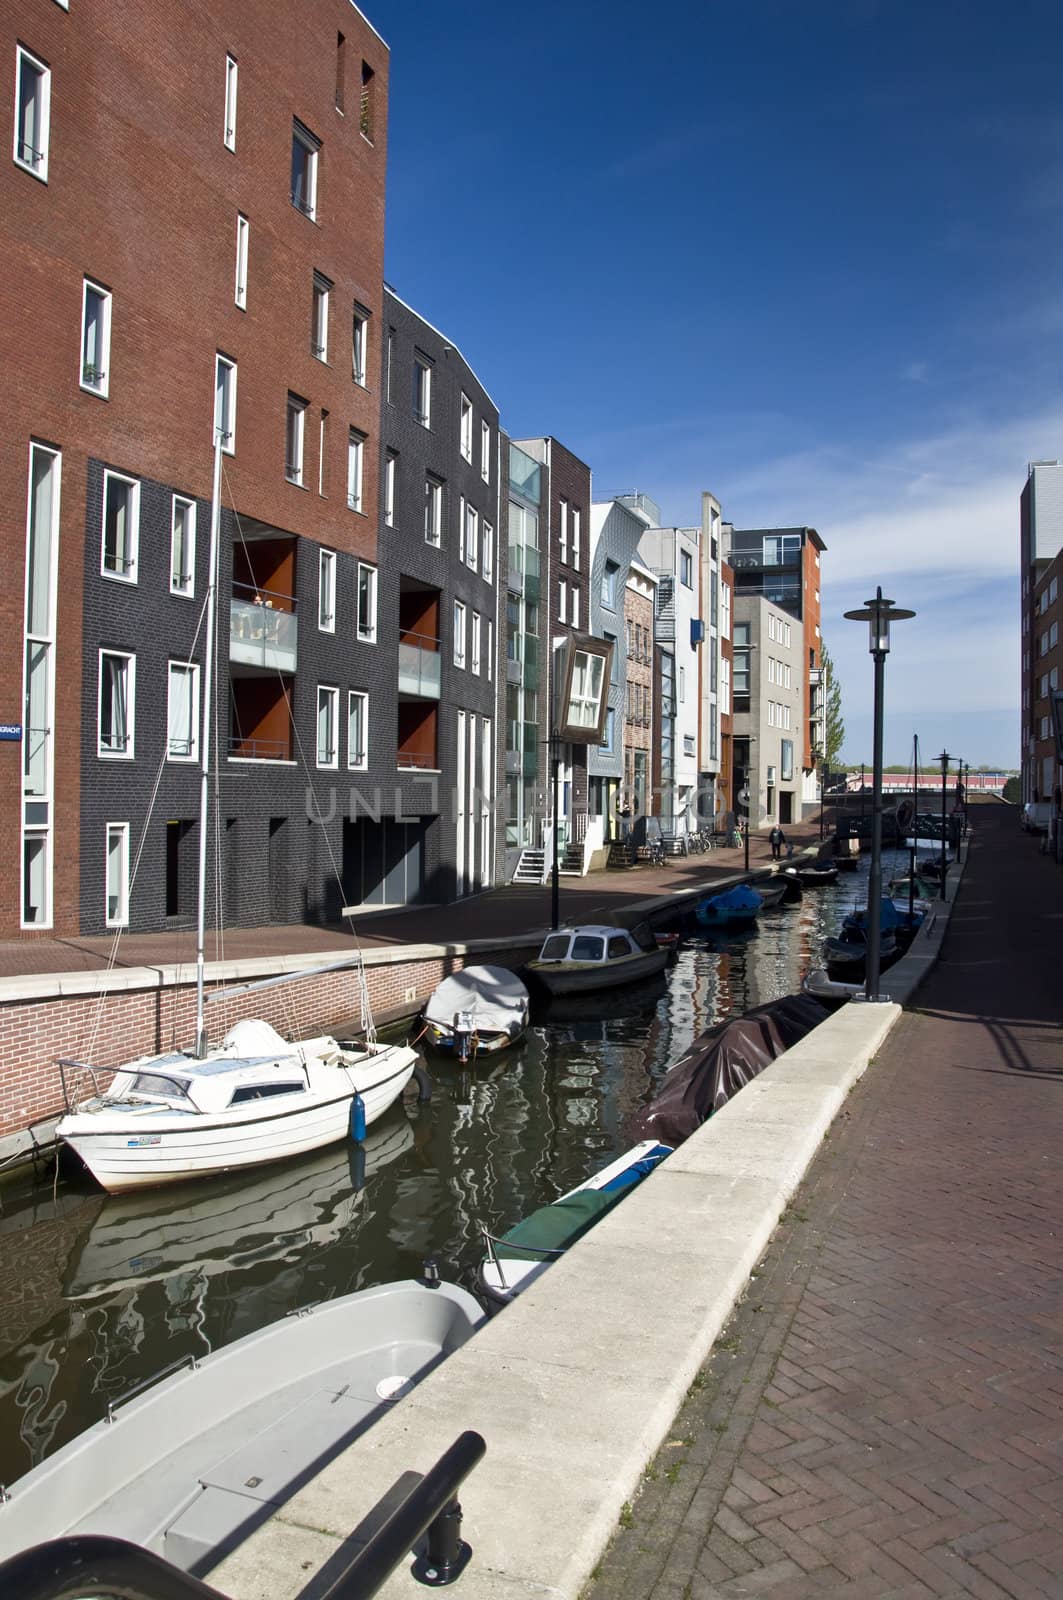 Modern residential houses on the canal in Amsterdam. Spring cityscape.